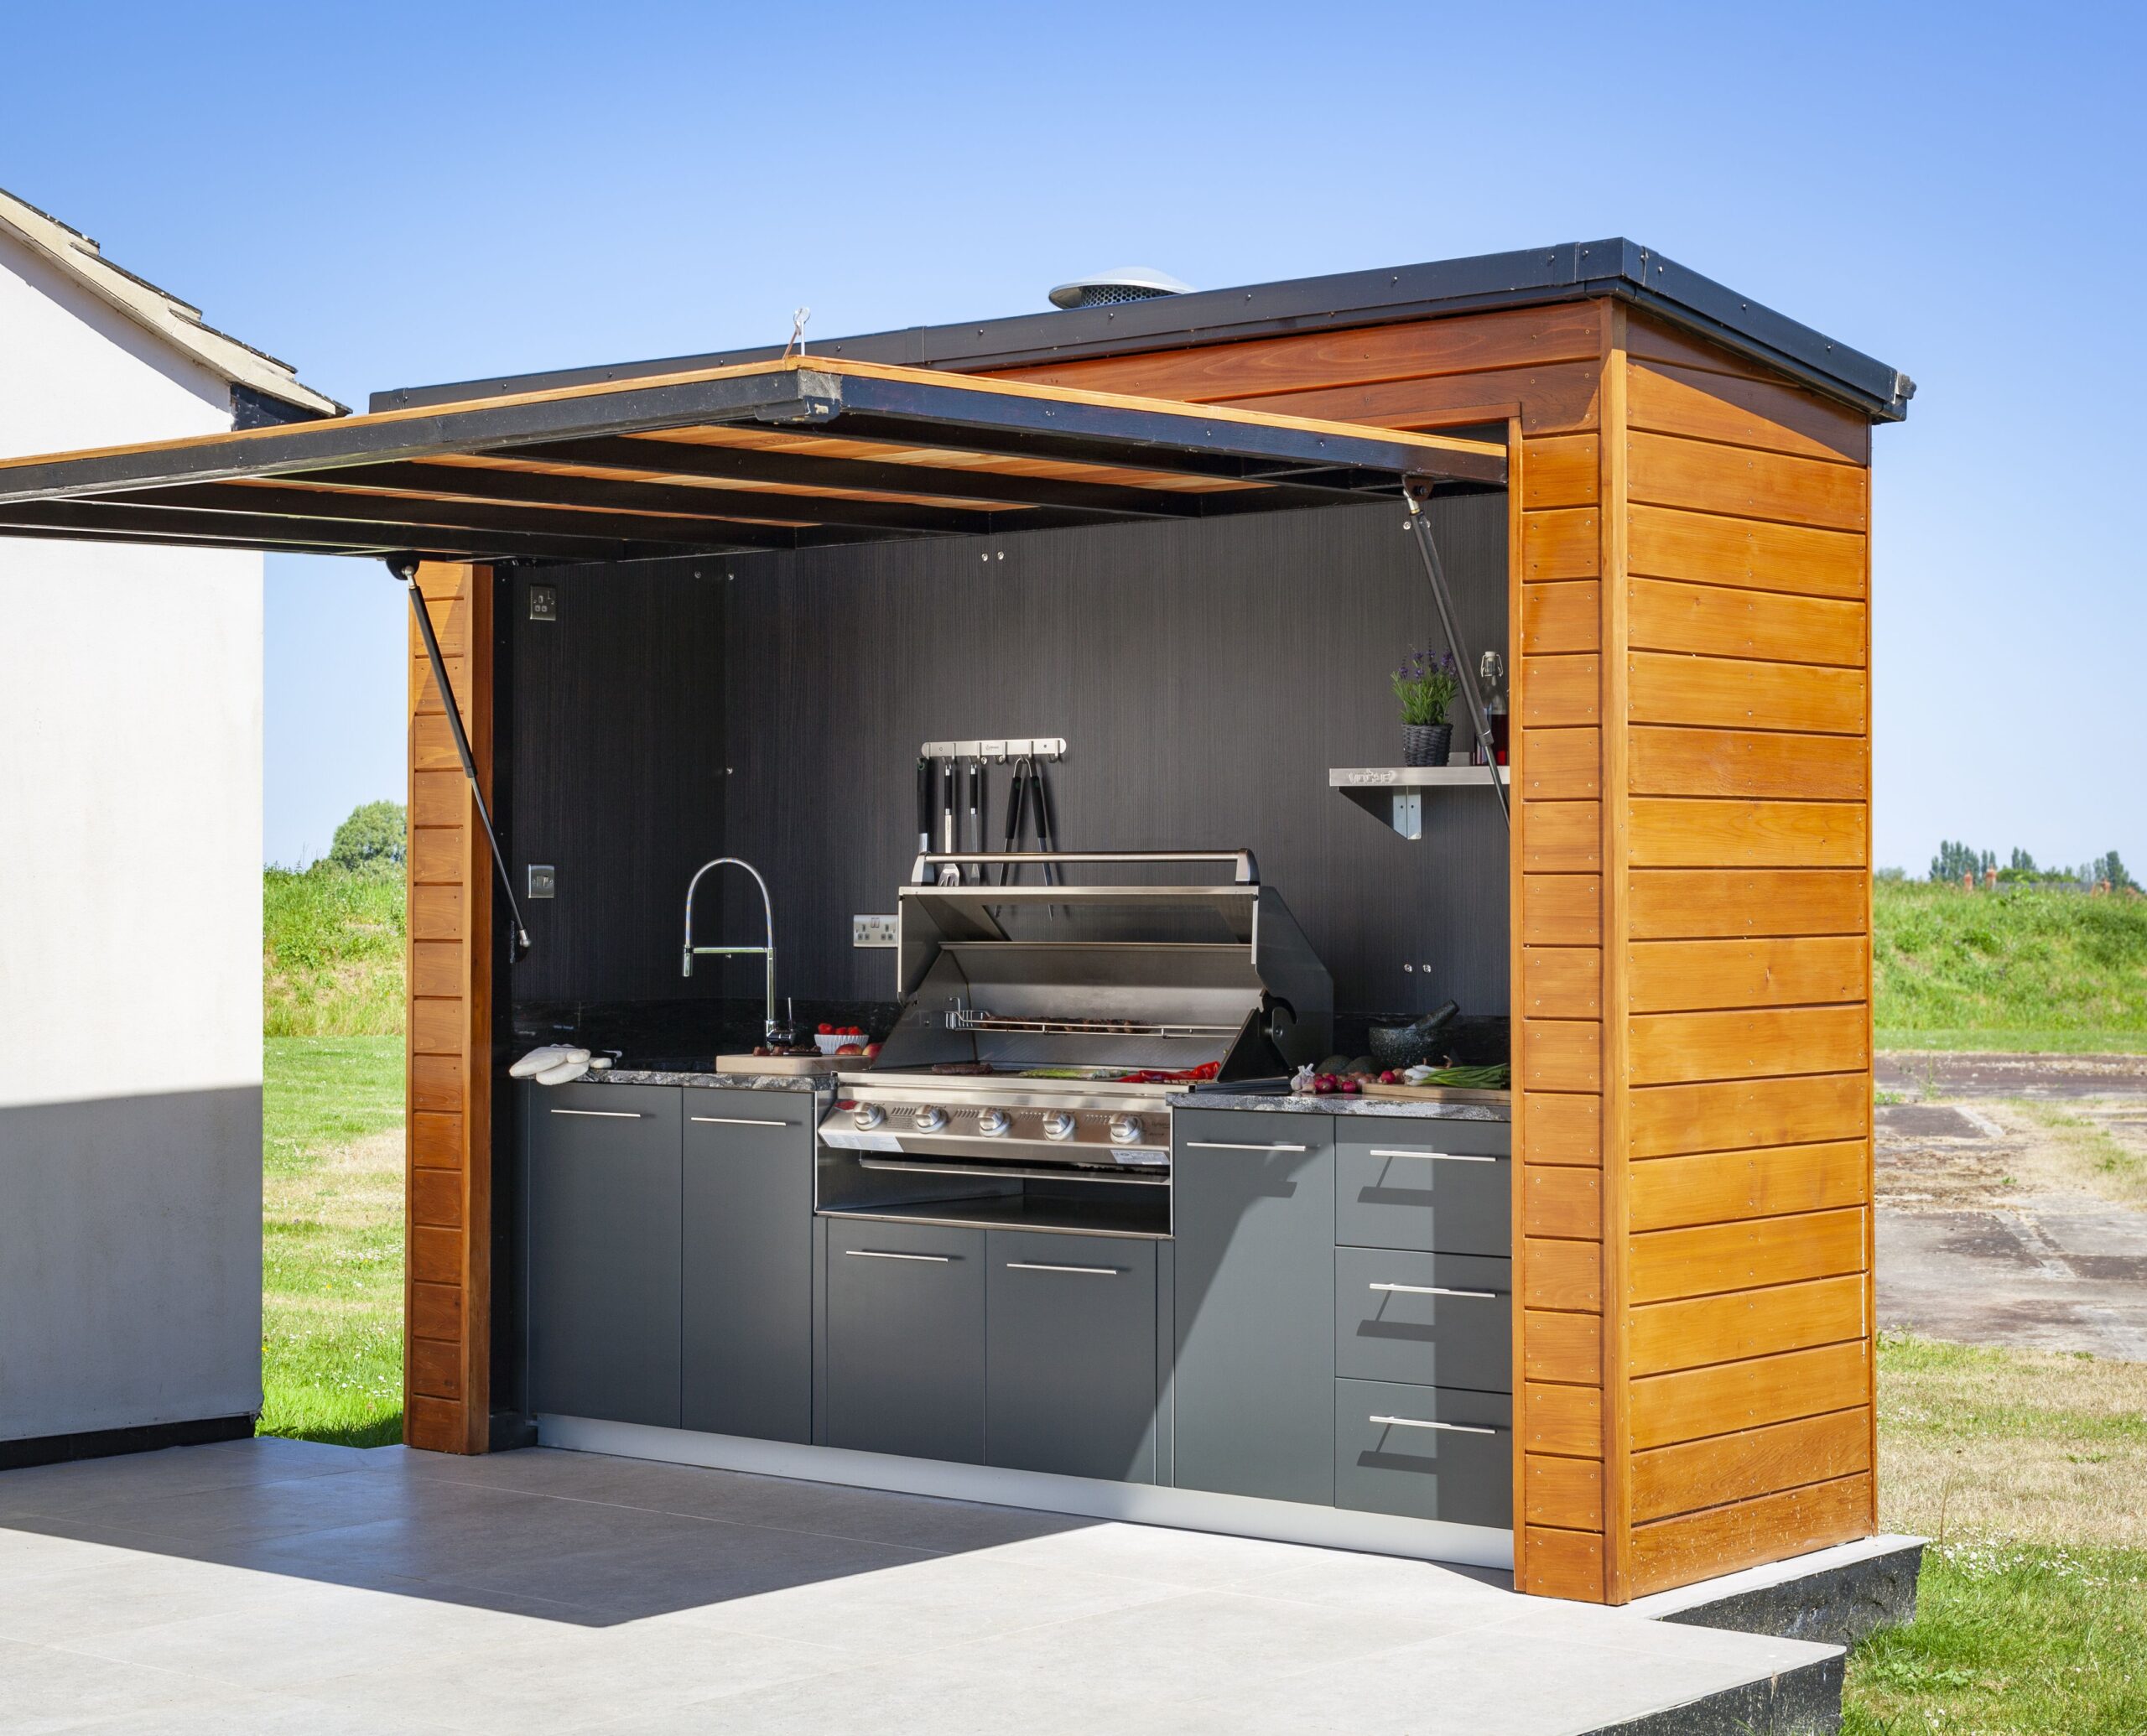 The Essential Guide to Designing Your Dream Outdoor Kitchen